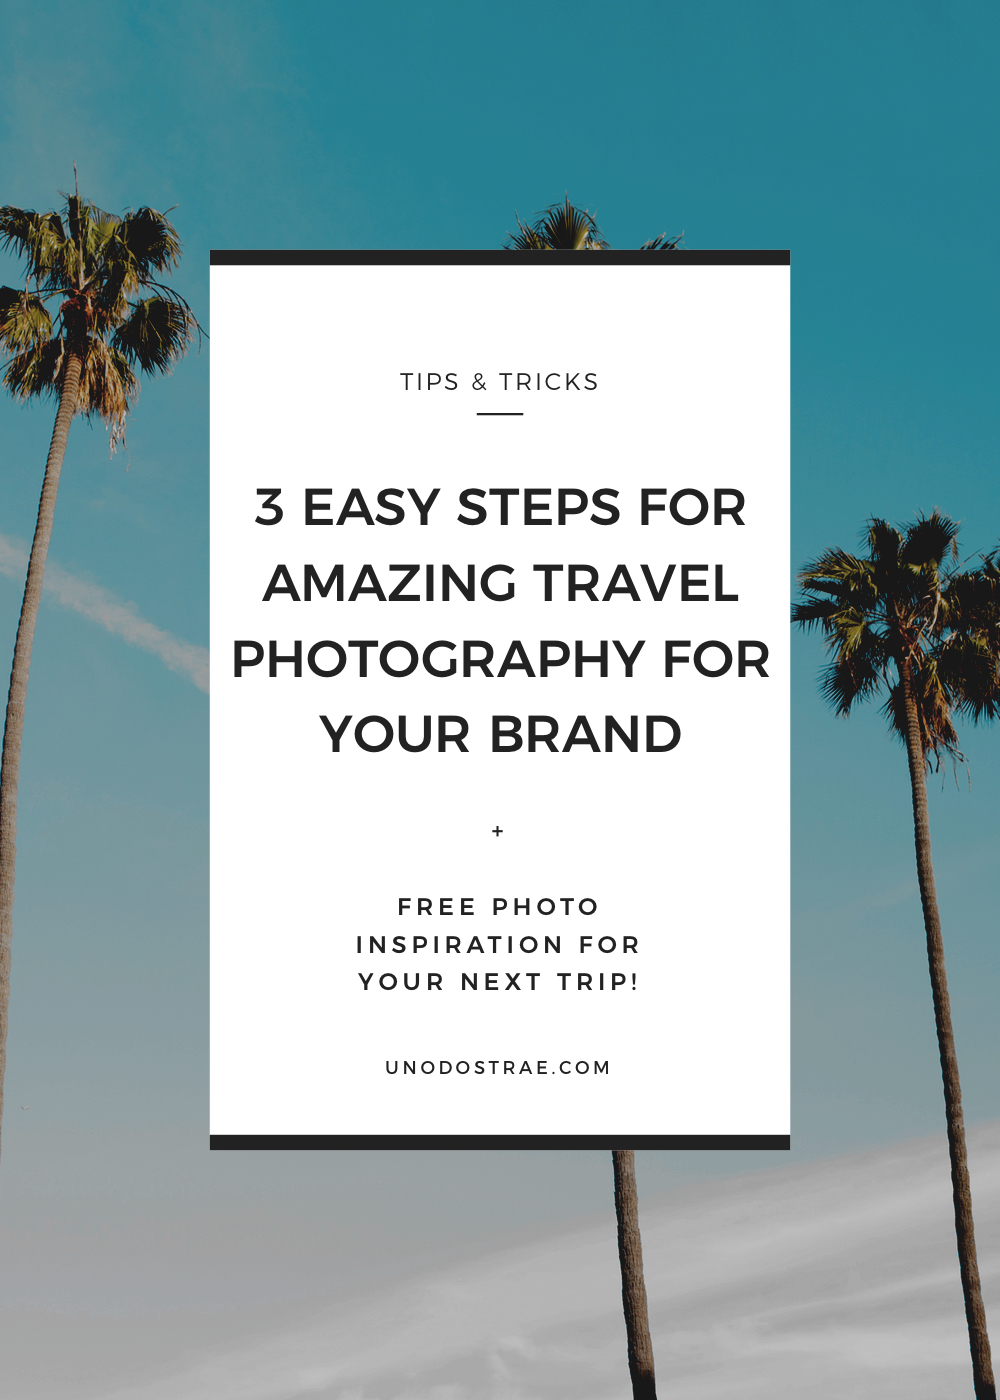 Most entrepreneurs overlook these 3 easy steps before taking travel photography for their brand | from unodostrae.com